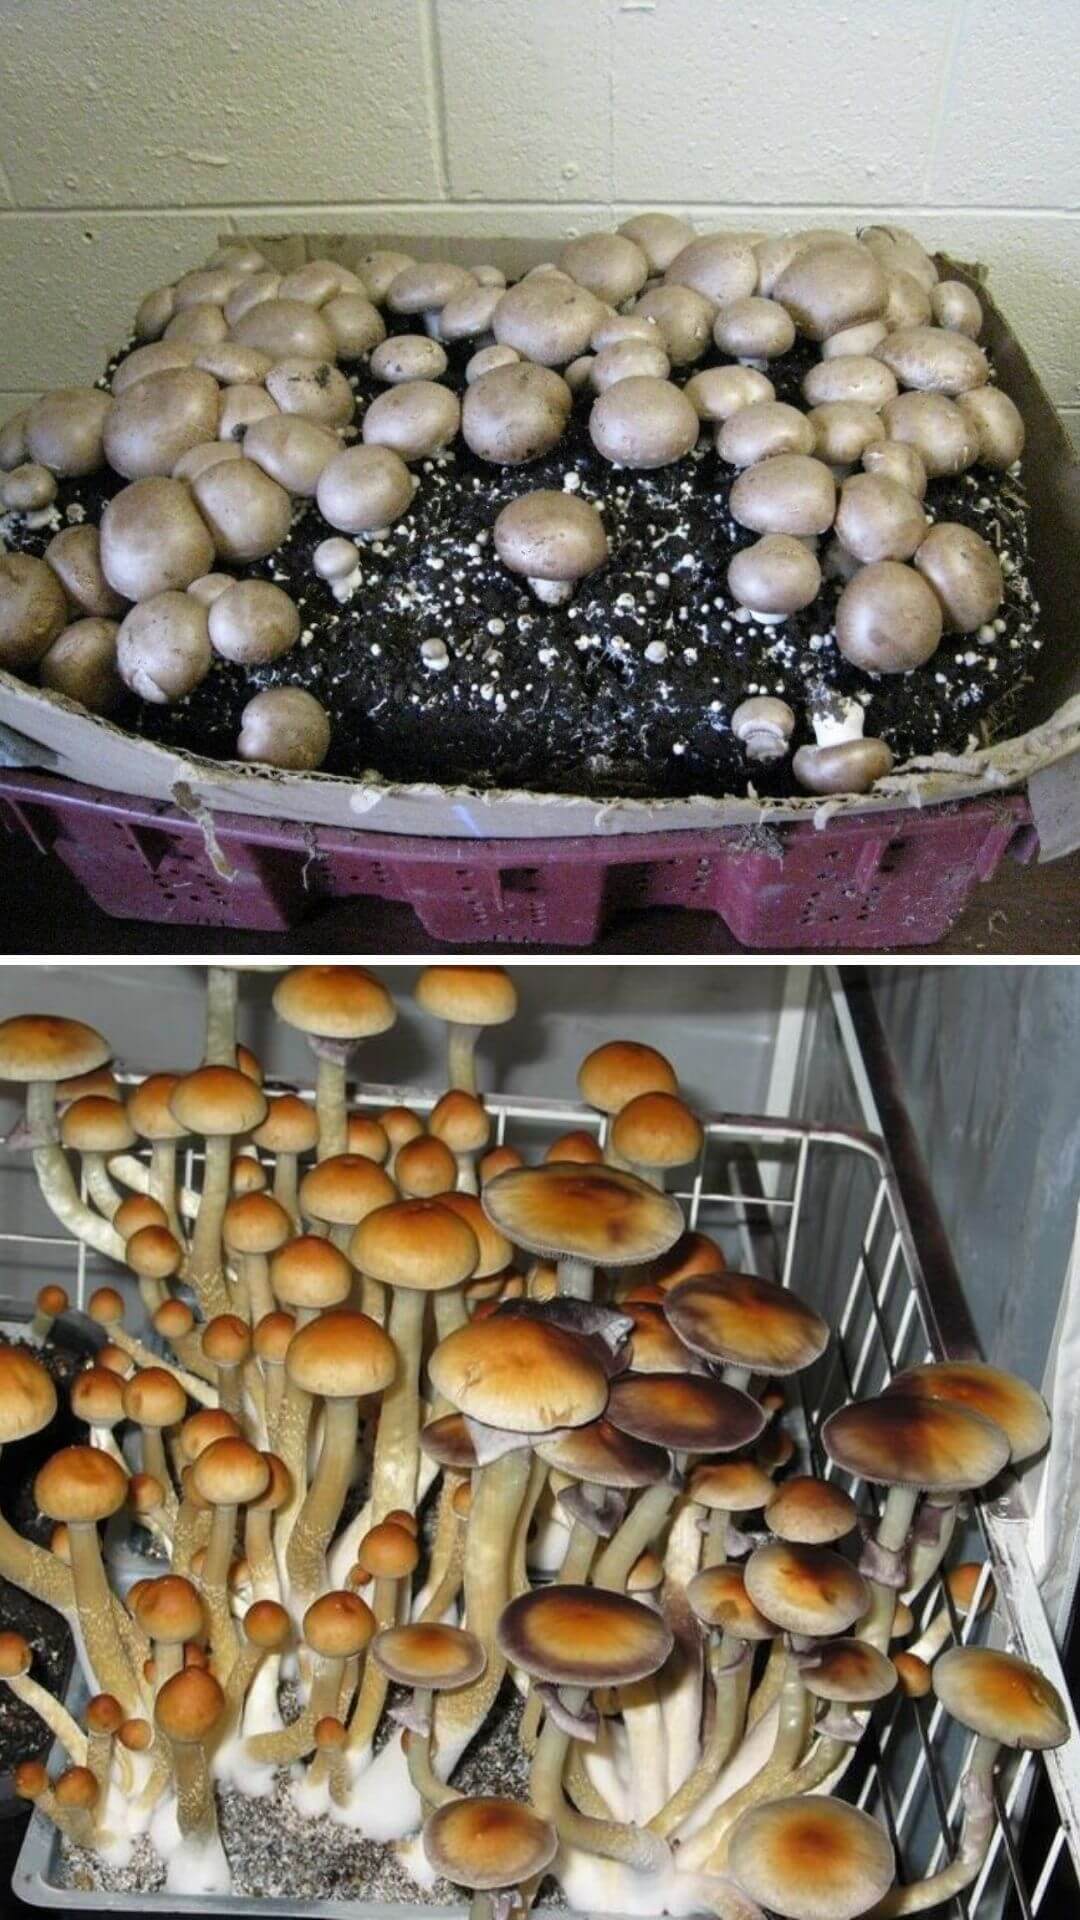 How to grow mushrooms from kitchen scraps